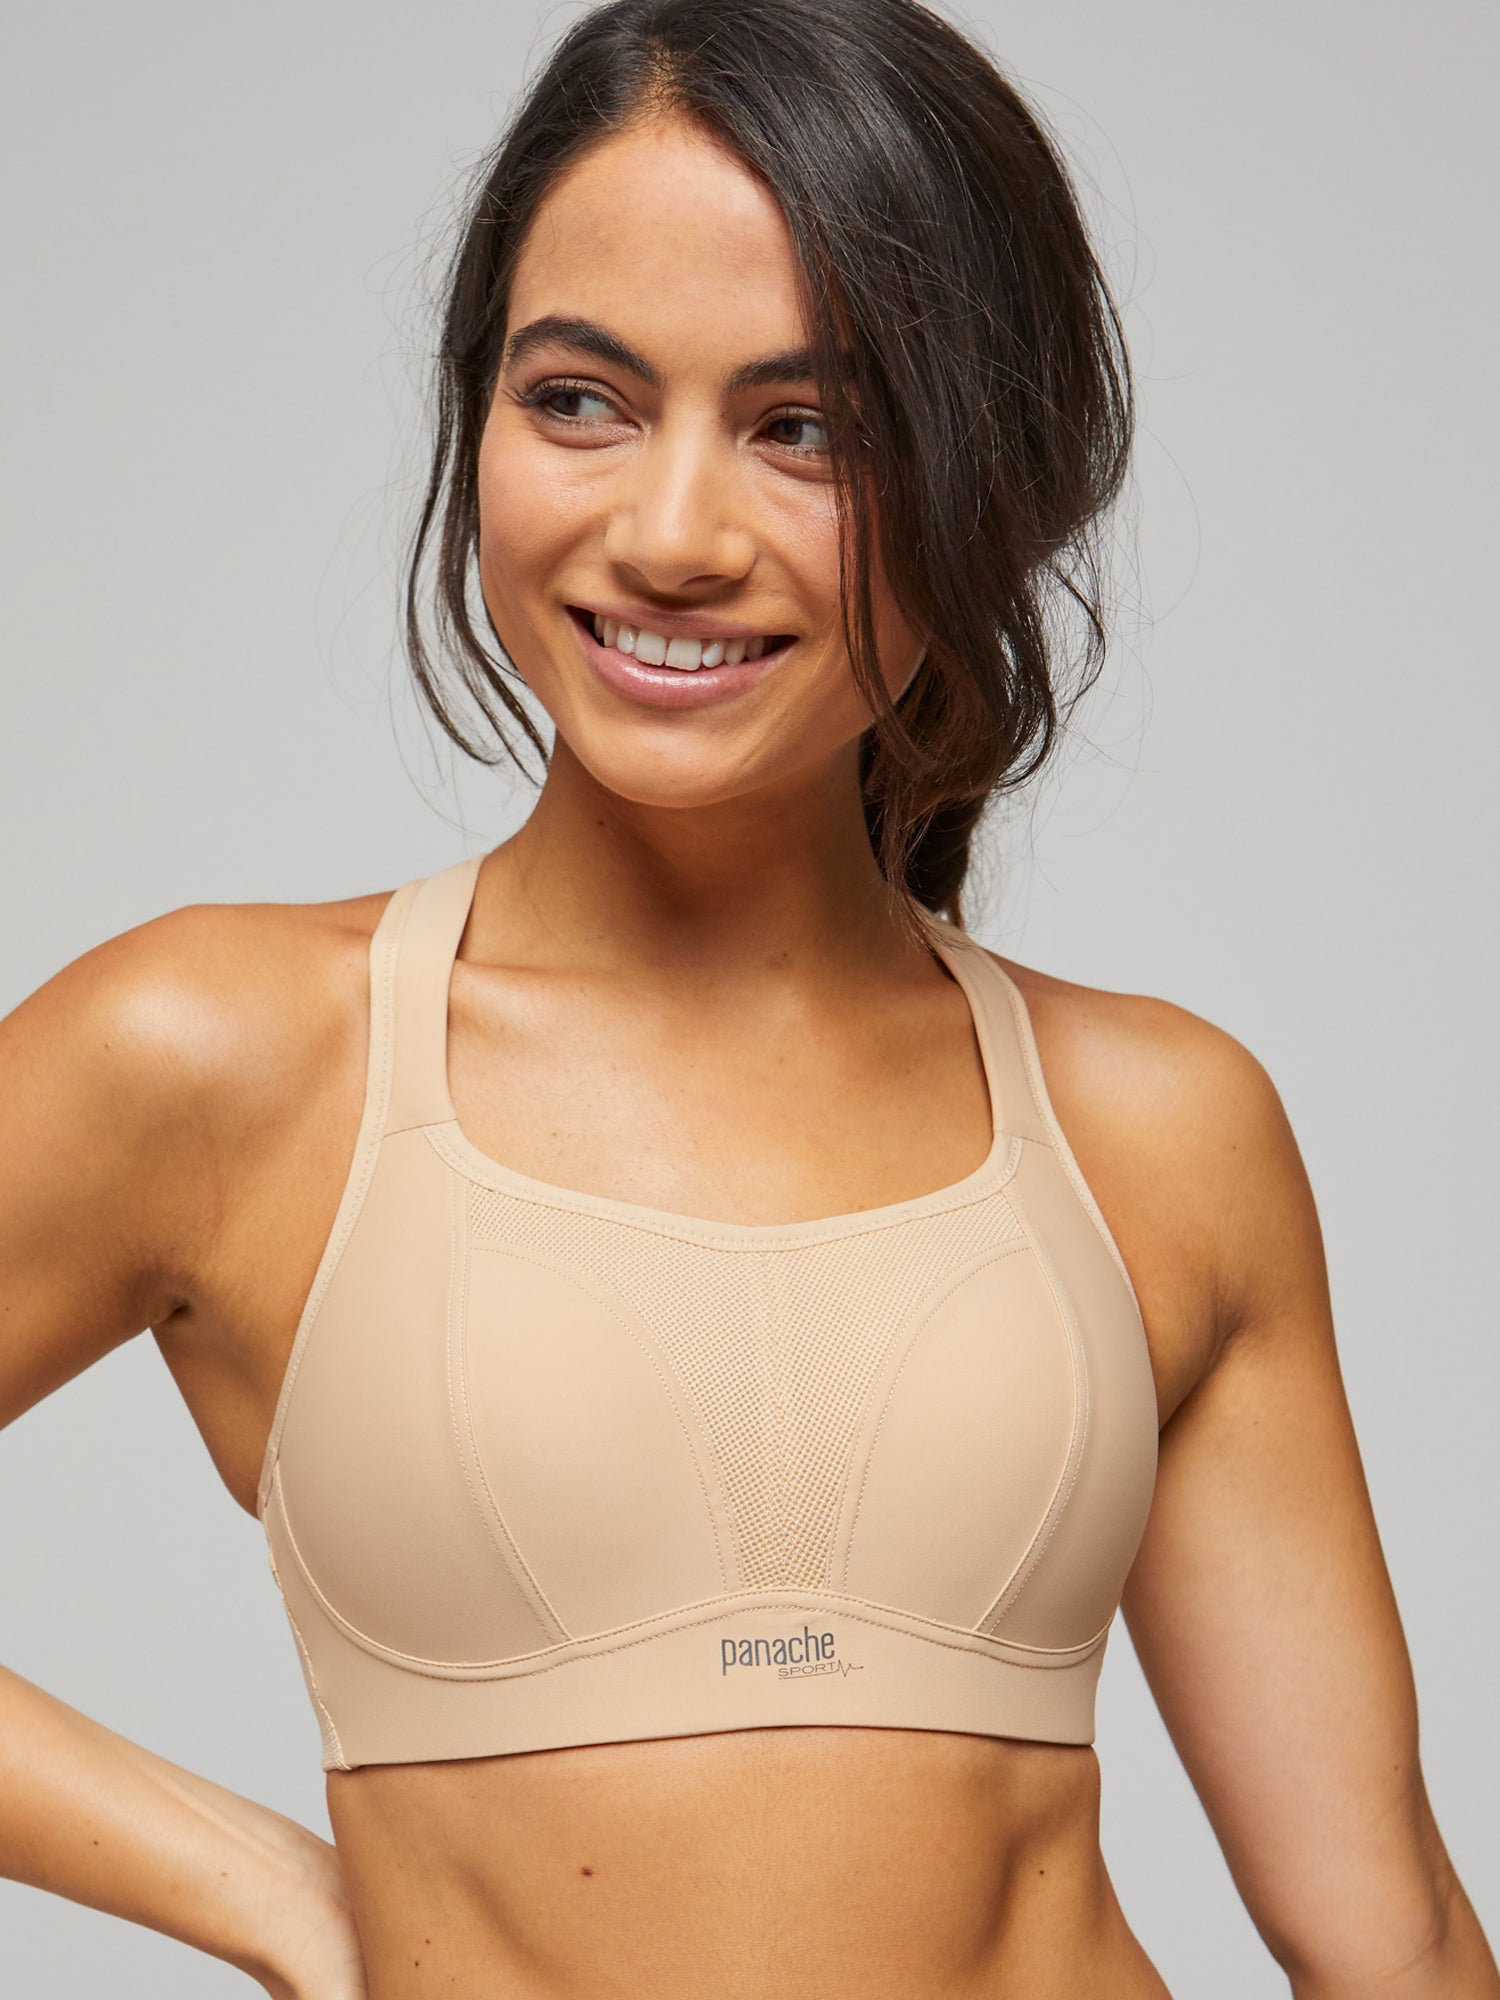 Non-Wired Sports Bra Charcoal- 7341